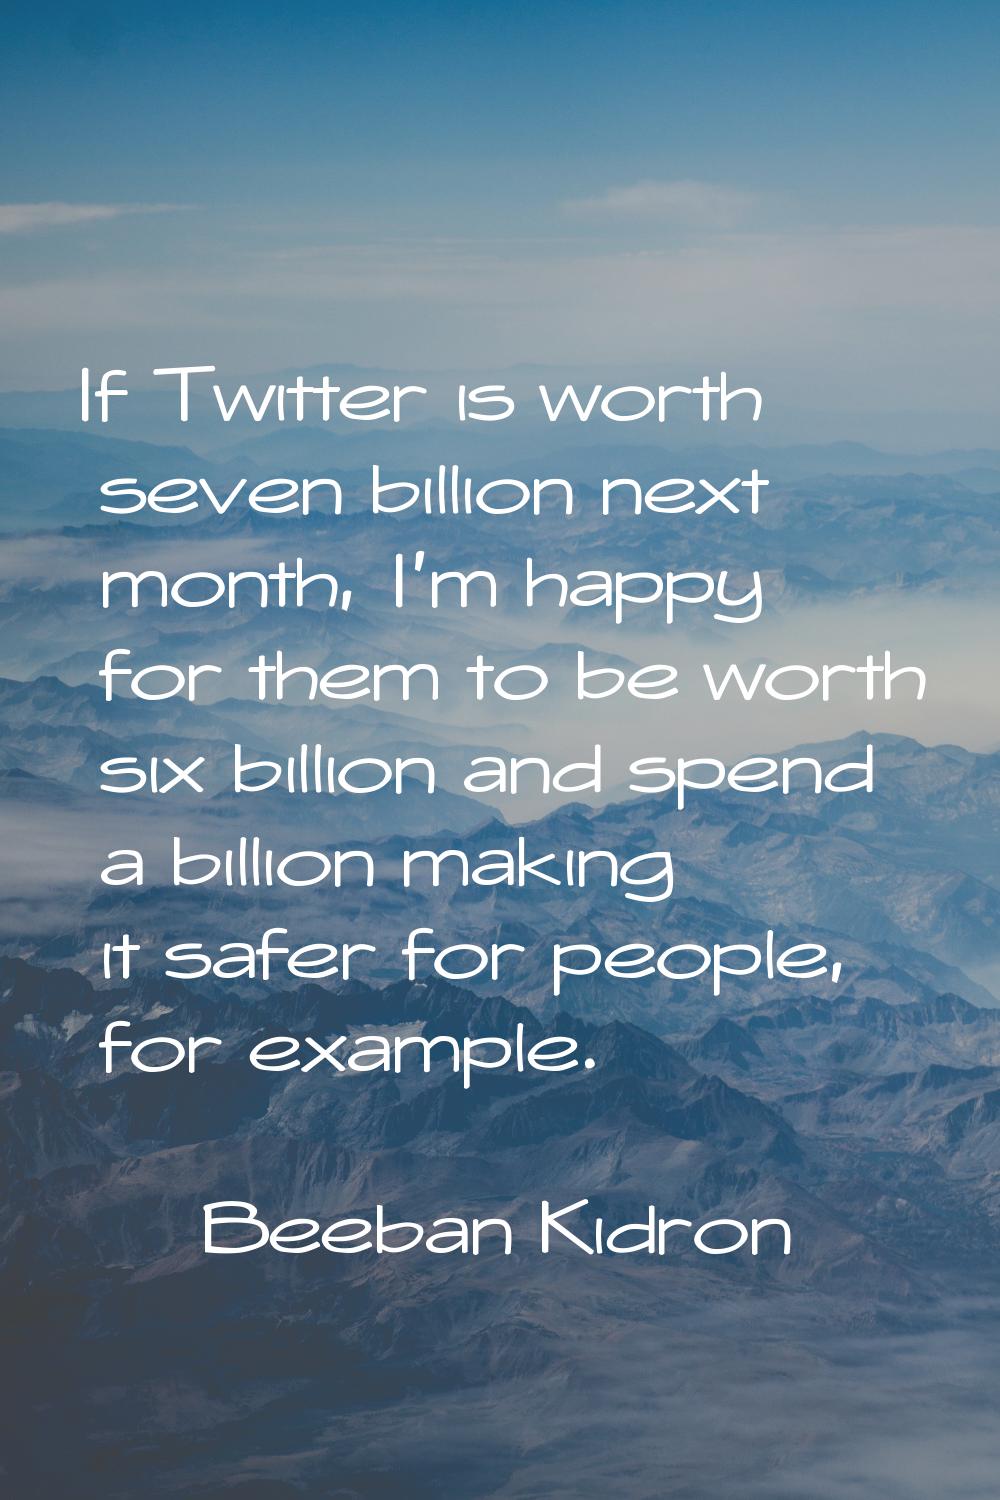 If Twitter is worth seven billion next month, I'm happy for them to be worth six billion and spend 